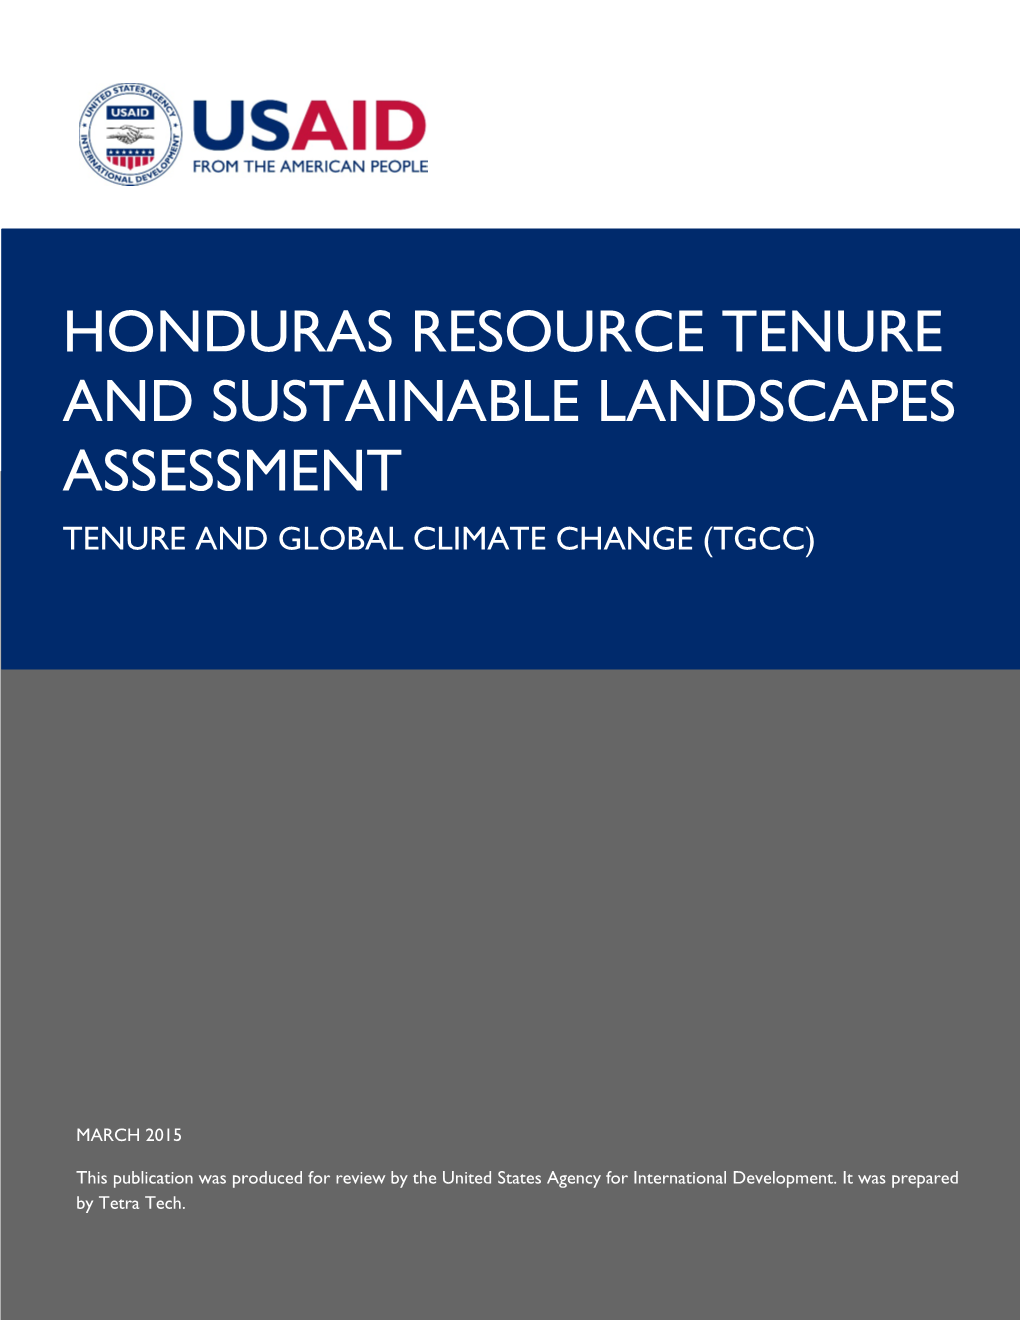 Honduras Resource Tenure and Sustainable Landscapes Assessment